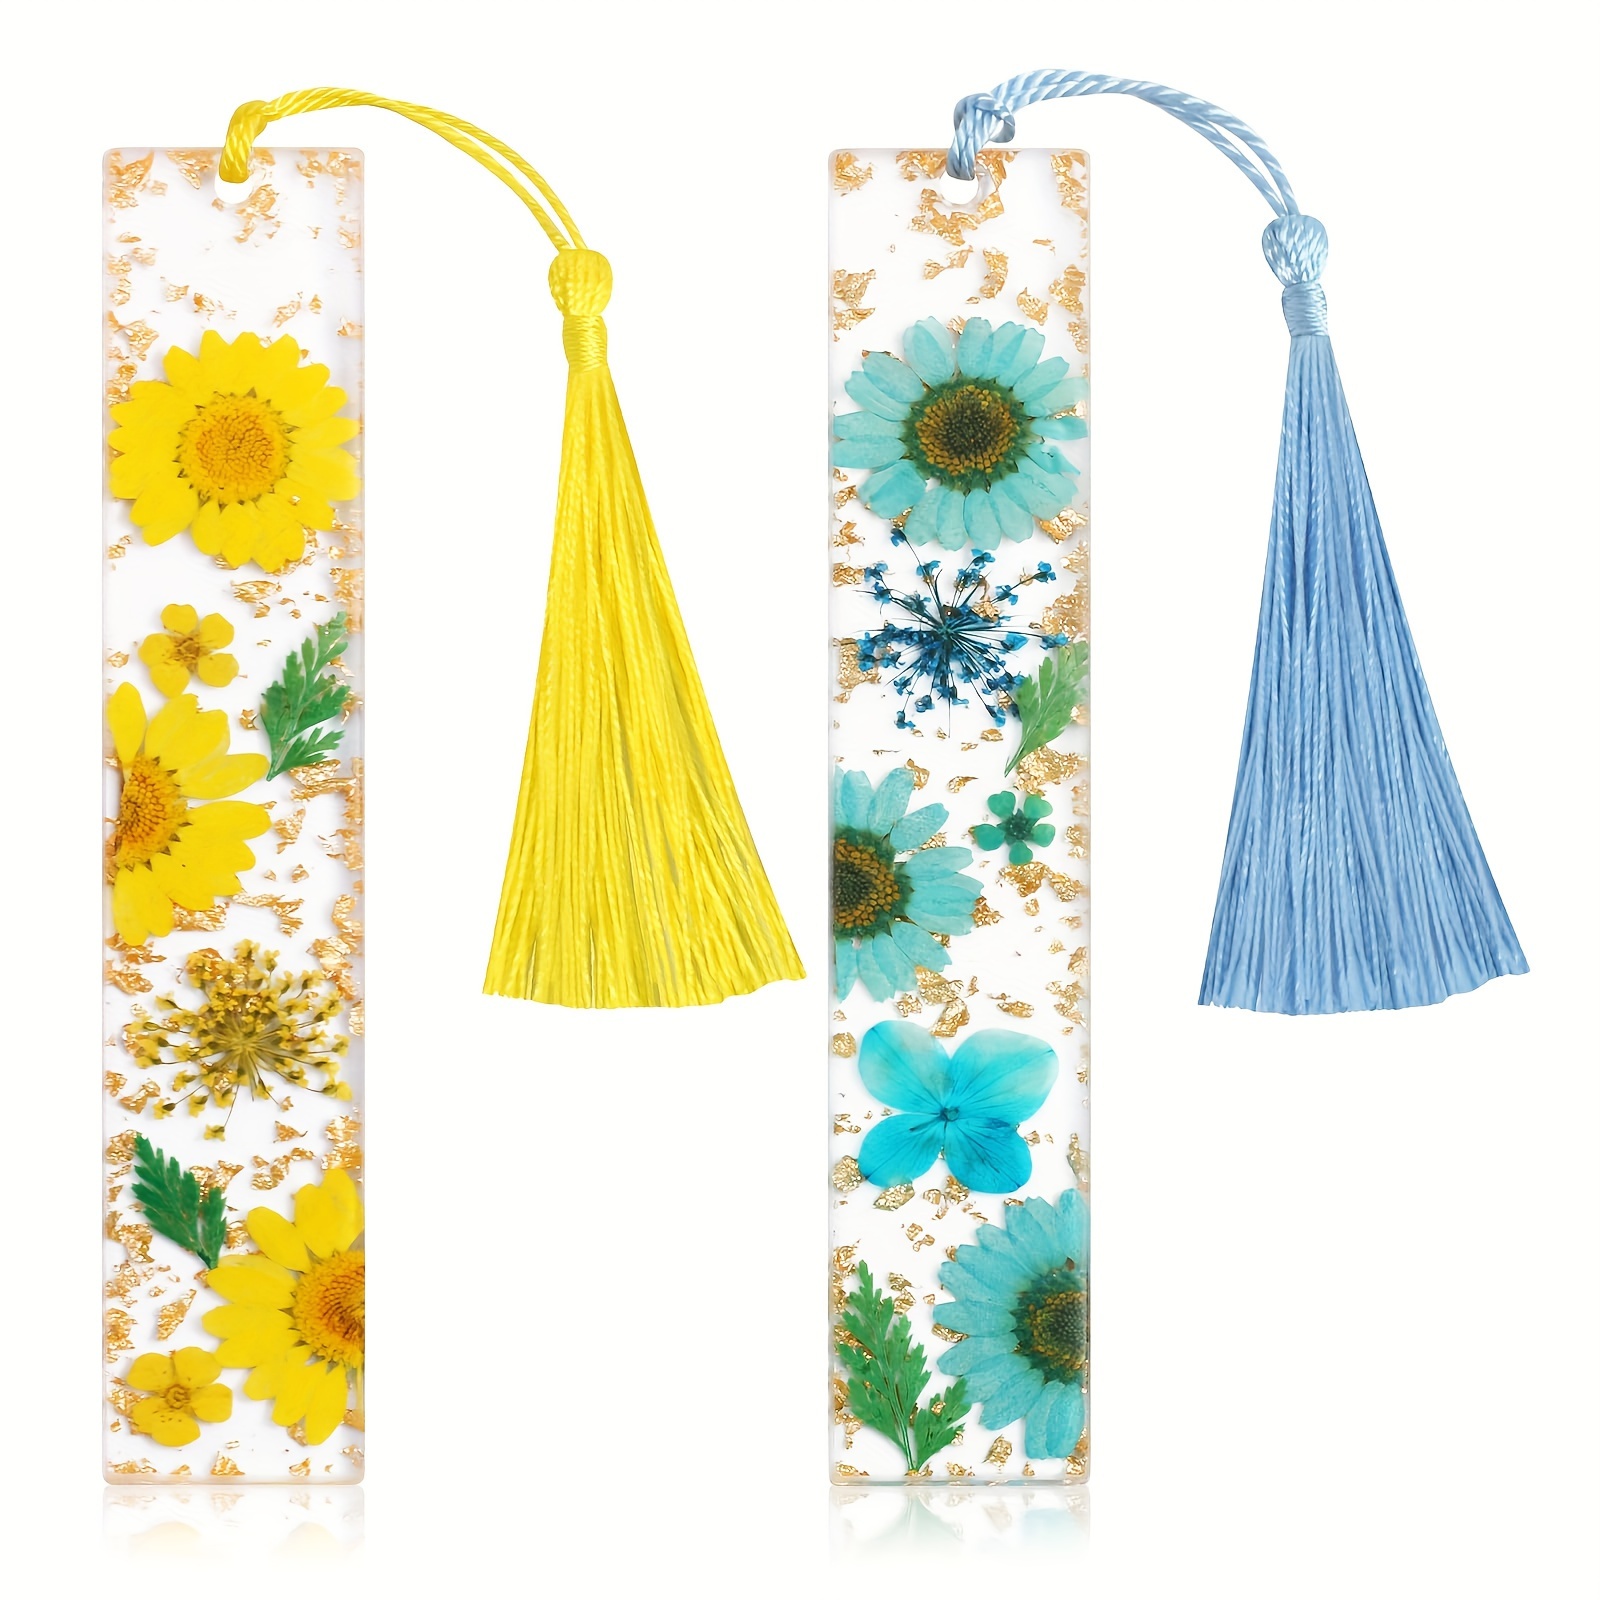 DIY Transparent Dried Flower Bookmark Making Kit Include Bookmarks Dried  Flowers Colorful Tassels and Tweezer Handmade Dried Floral Bookmark for